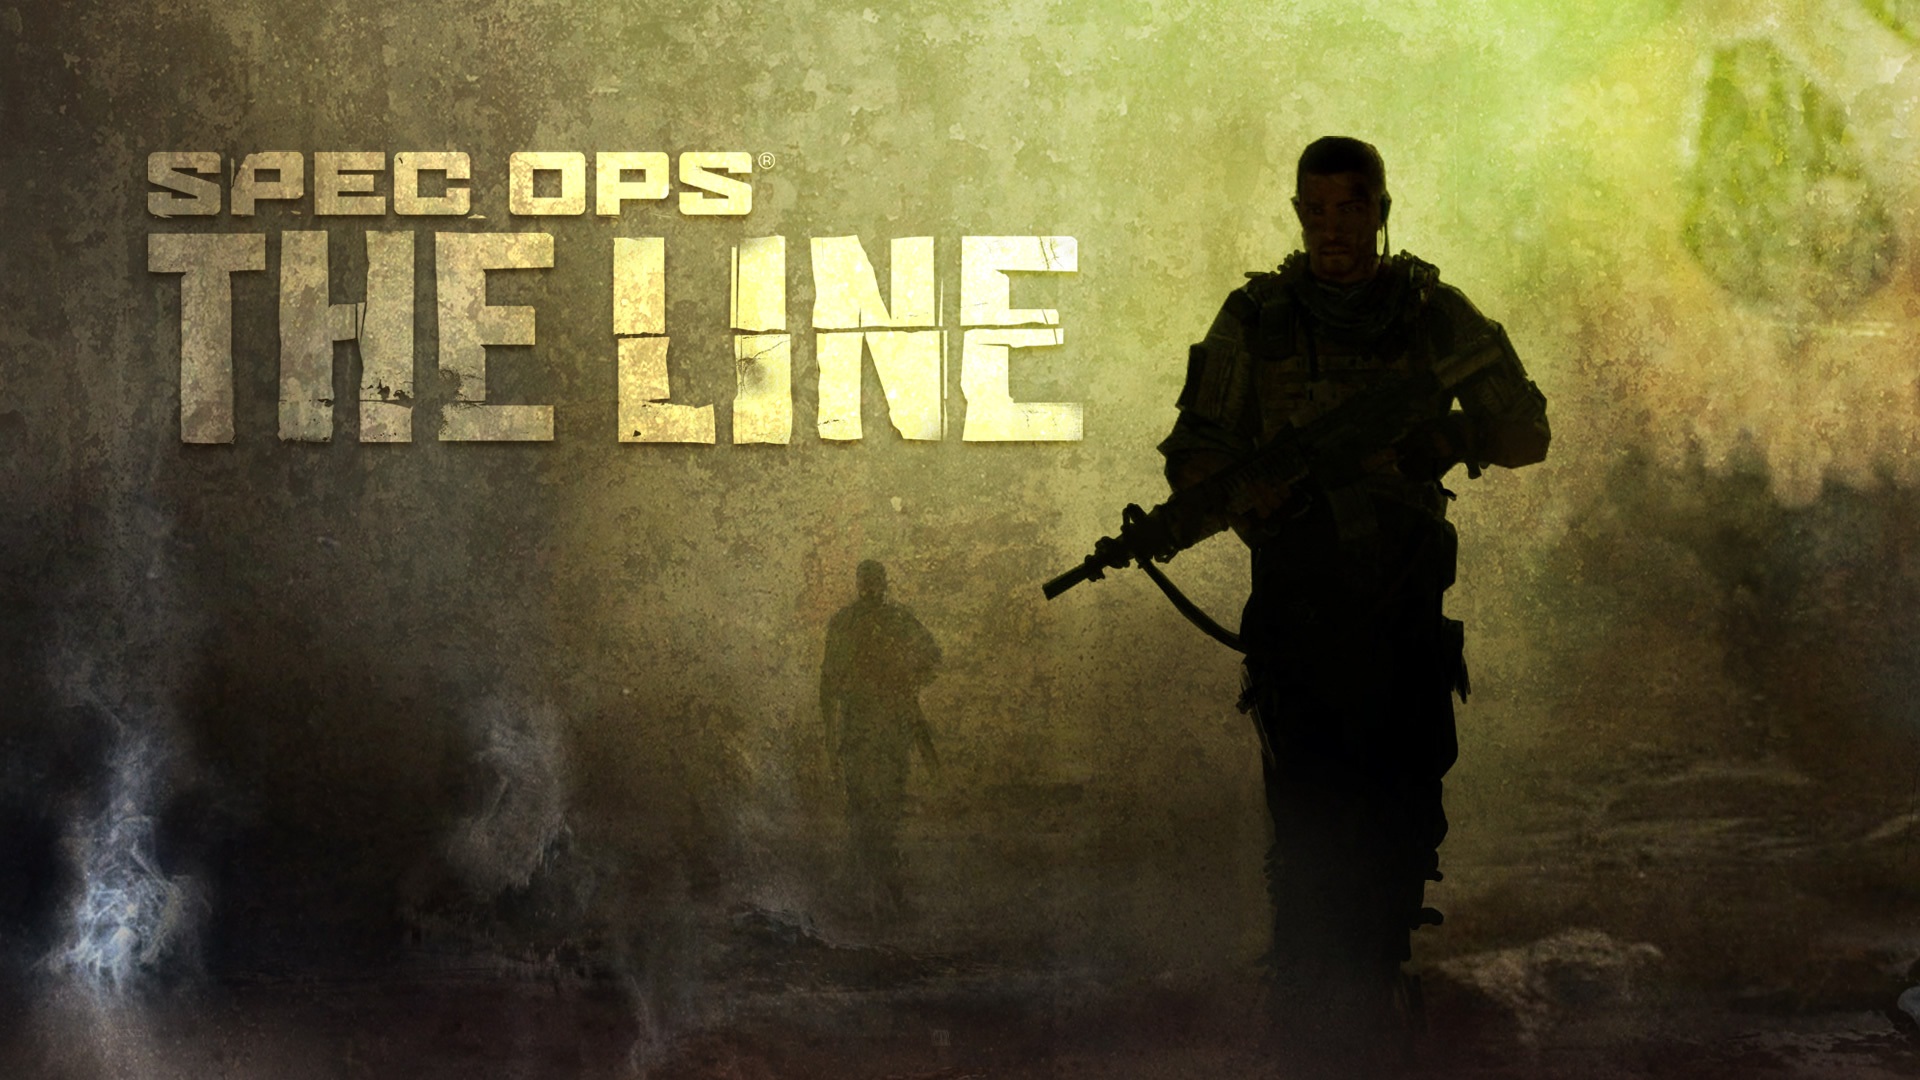 Free download Spec Ops The Line Wallpaper HD Page 2 [1920x1080] for